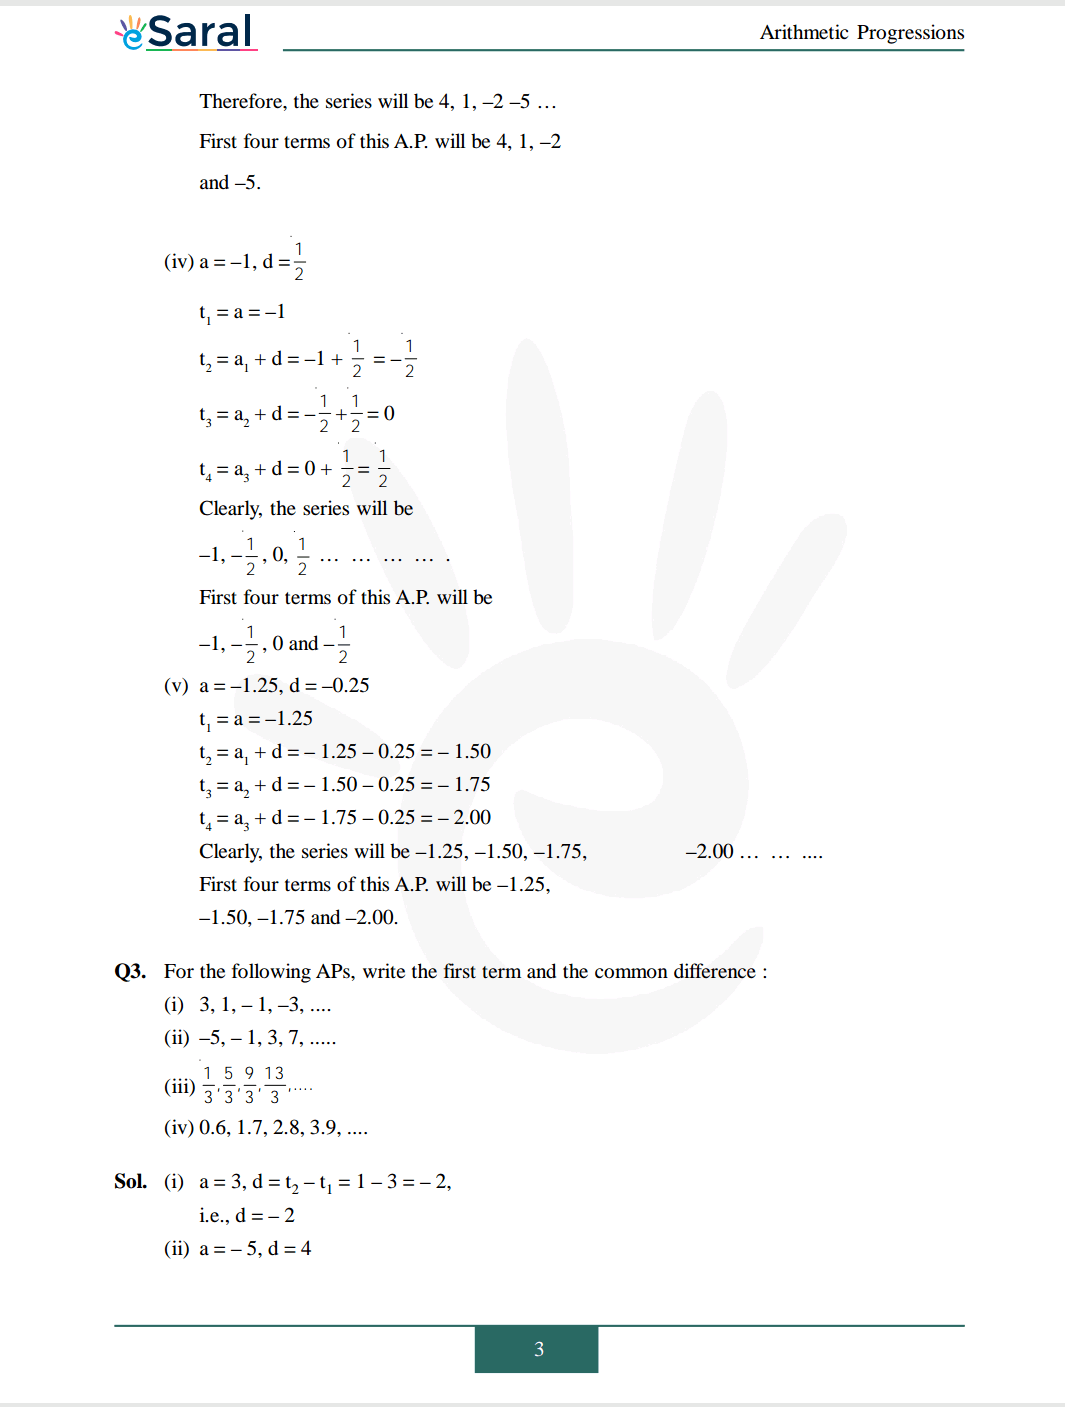 Class 10 Maths Chapter 5 exercise 5.1 solutions Image 3